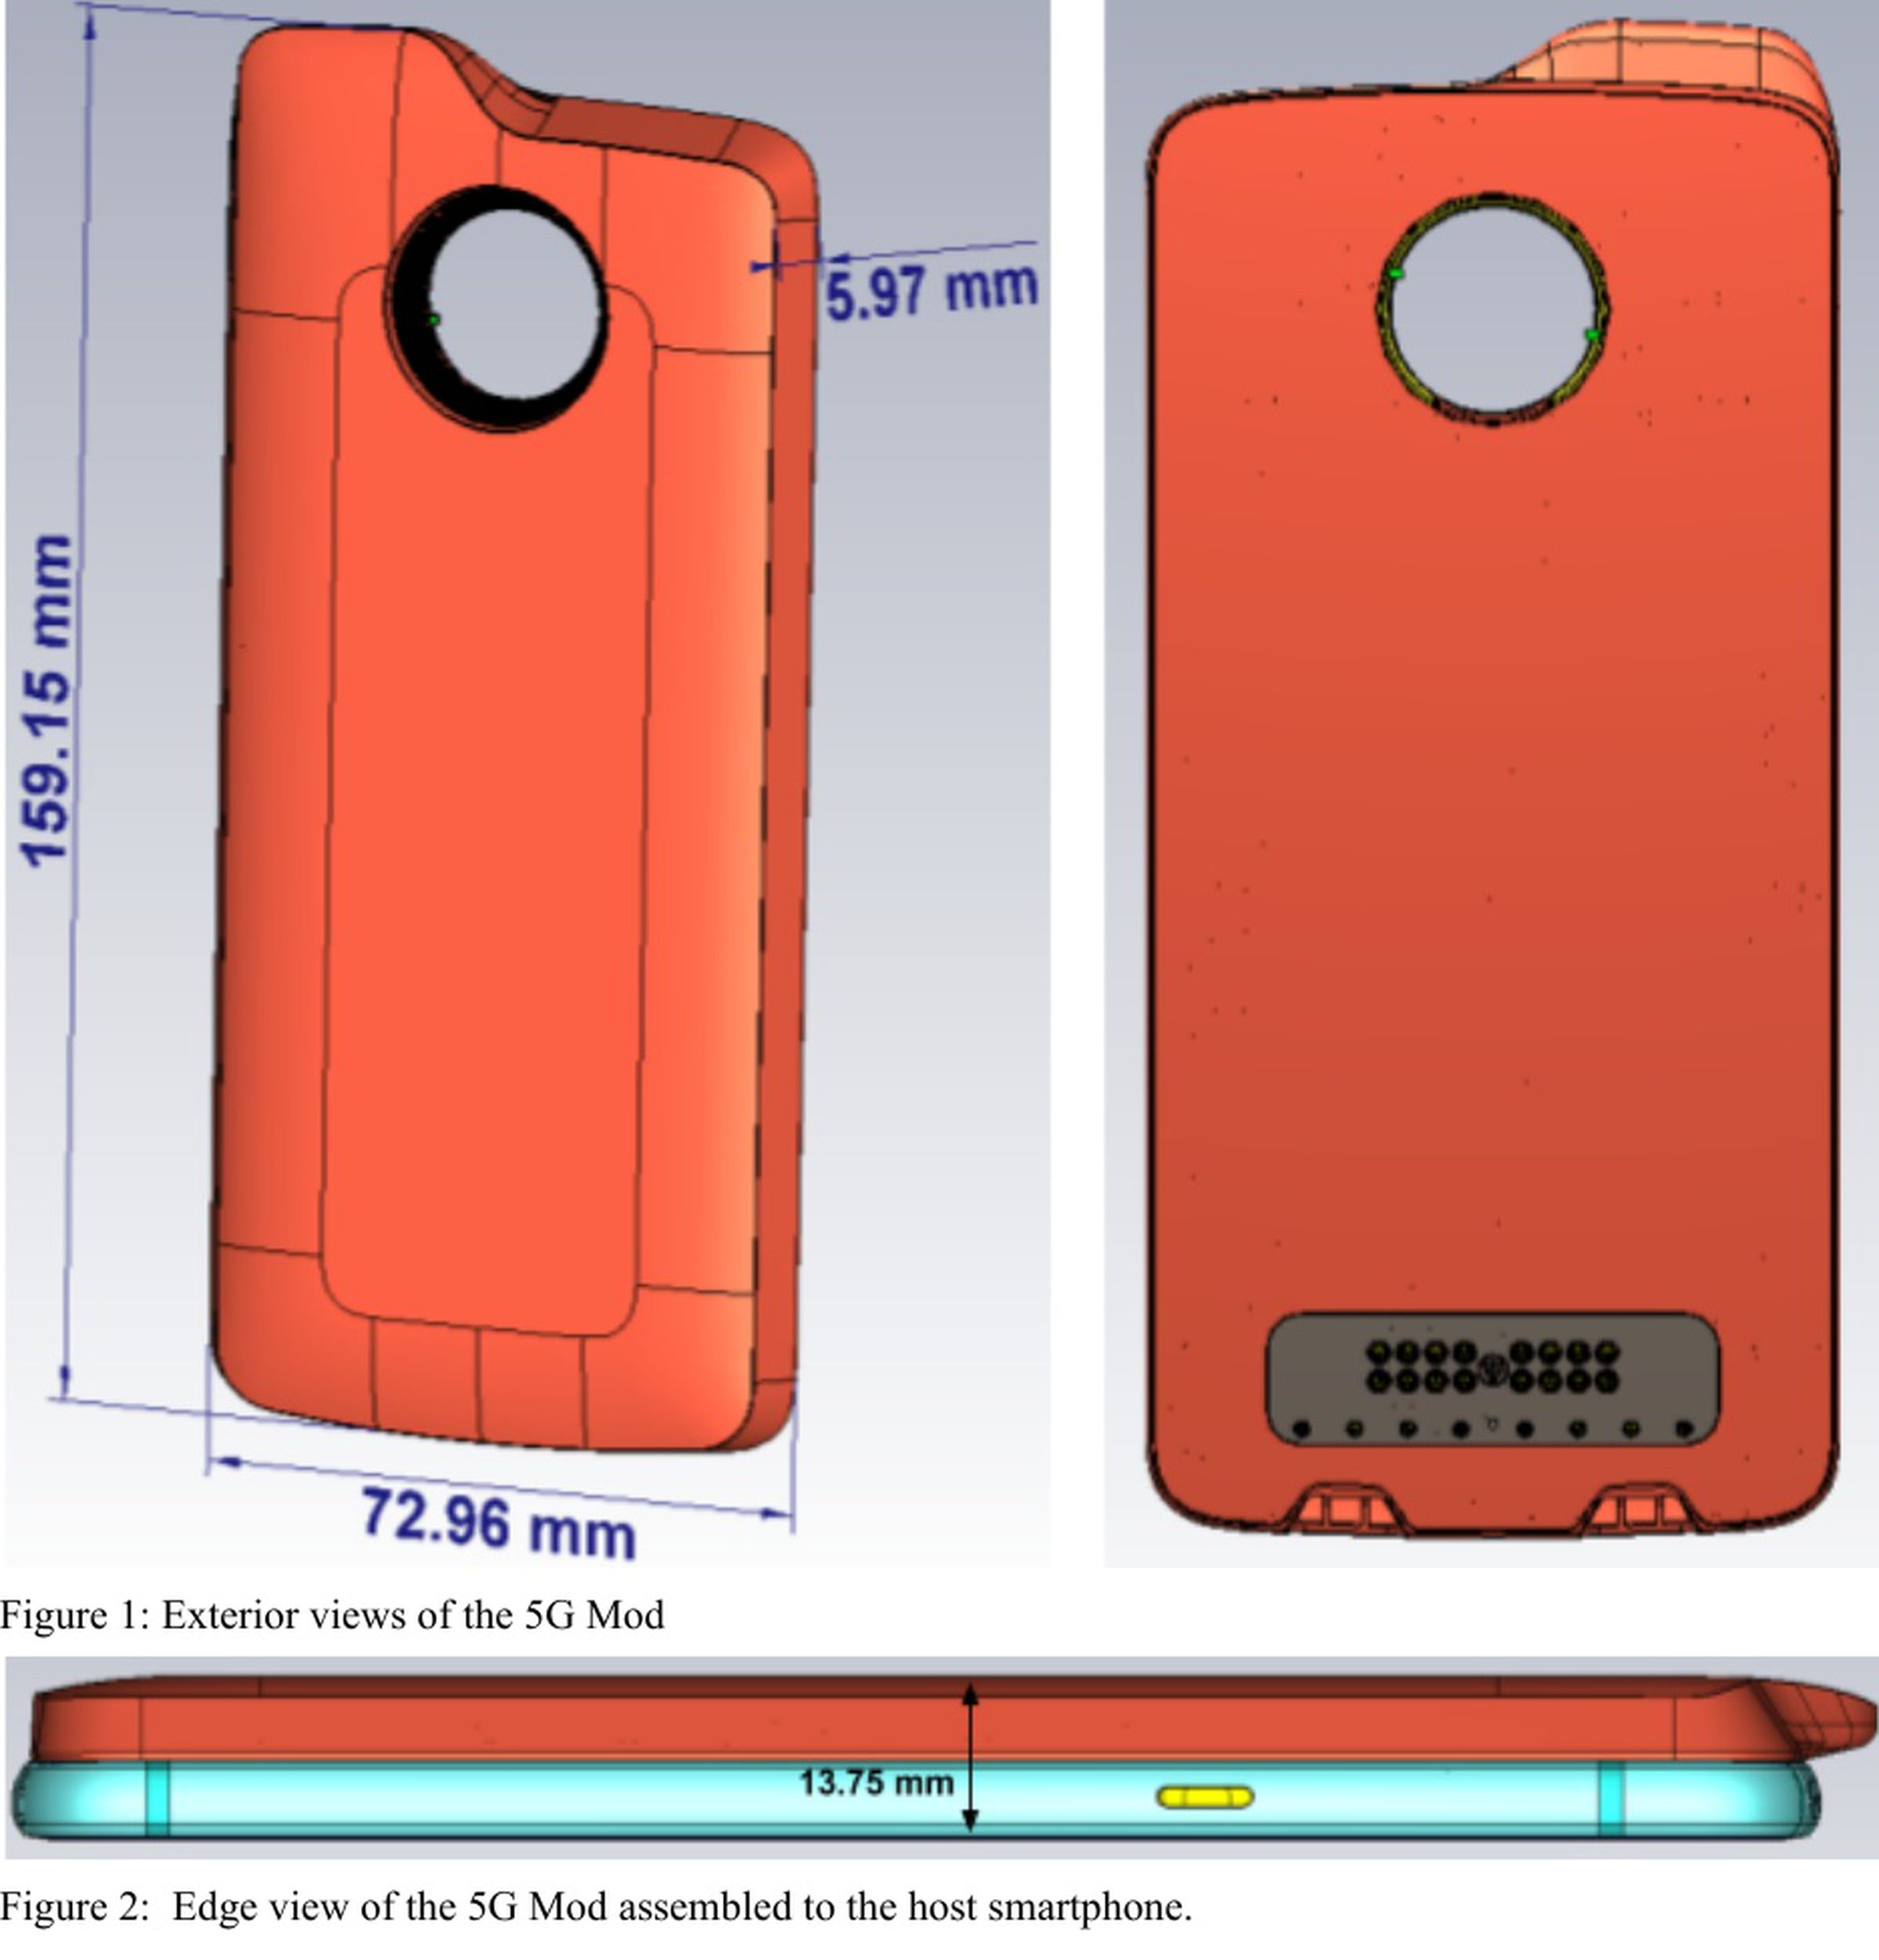 13.75mm total - 6.75mm phone = 7mm. Looks like the Mod tapers down to 5.97mm at the edges, though.